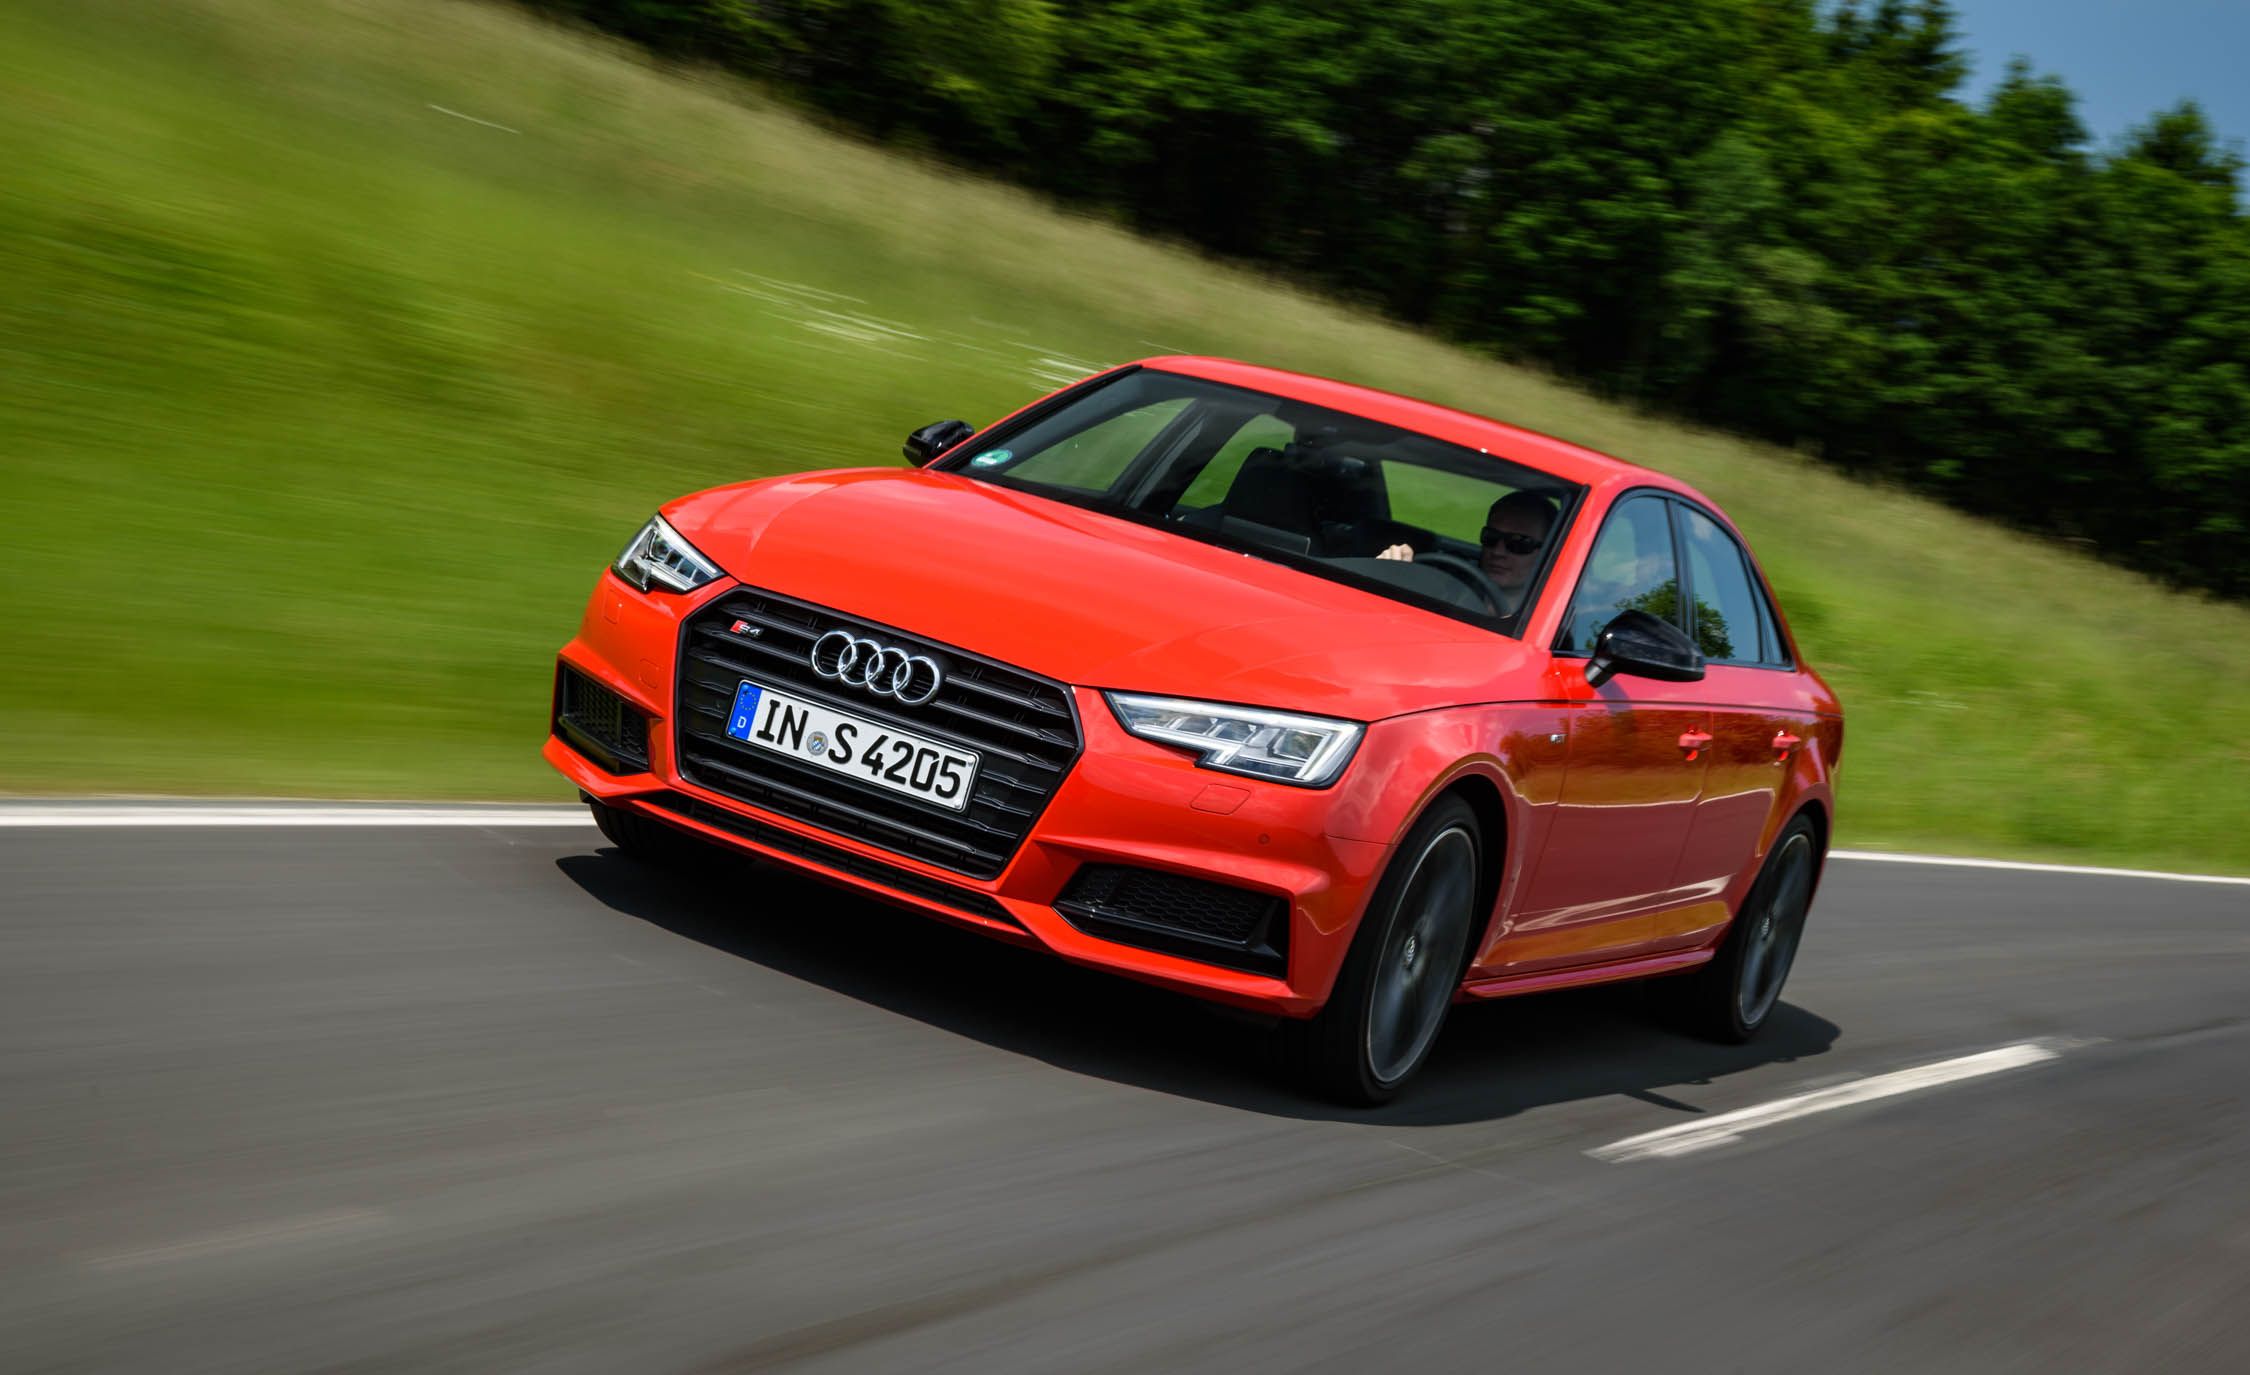 First Drive: 2018 Audi S4 with New 354-hp Turbo V-6